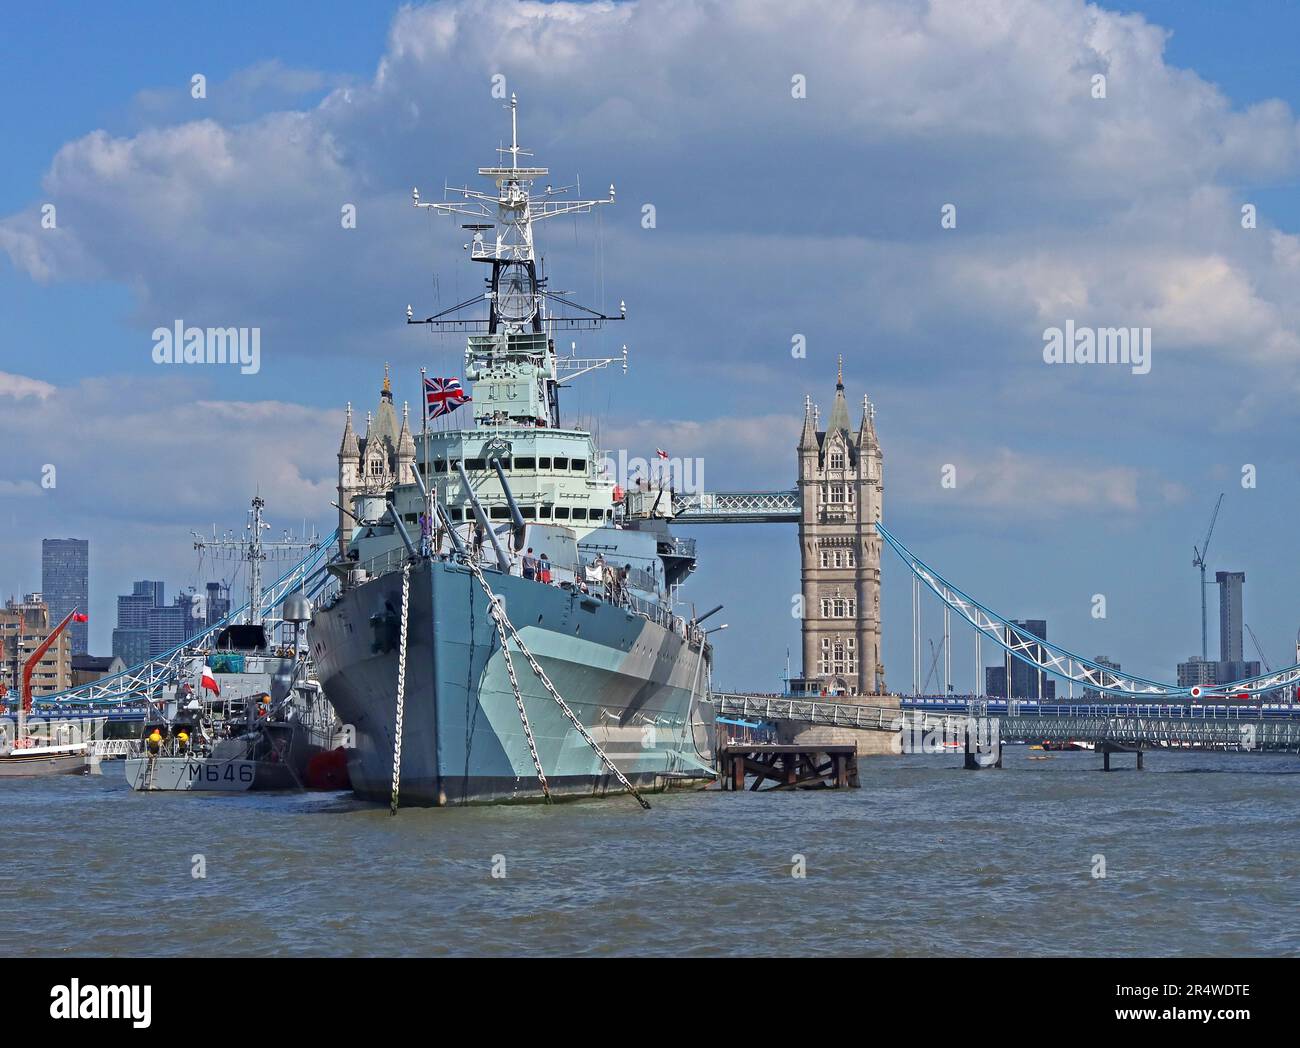 HMS Belfast, moored on the Thames south bank, Royal Navy museum ship, The Queen's Walk, London, England, SE1 2JH Stock Photo